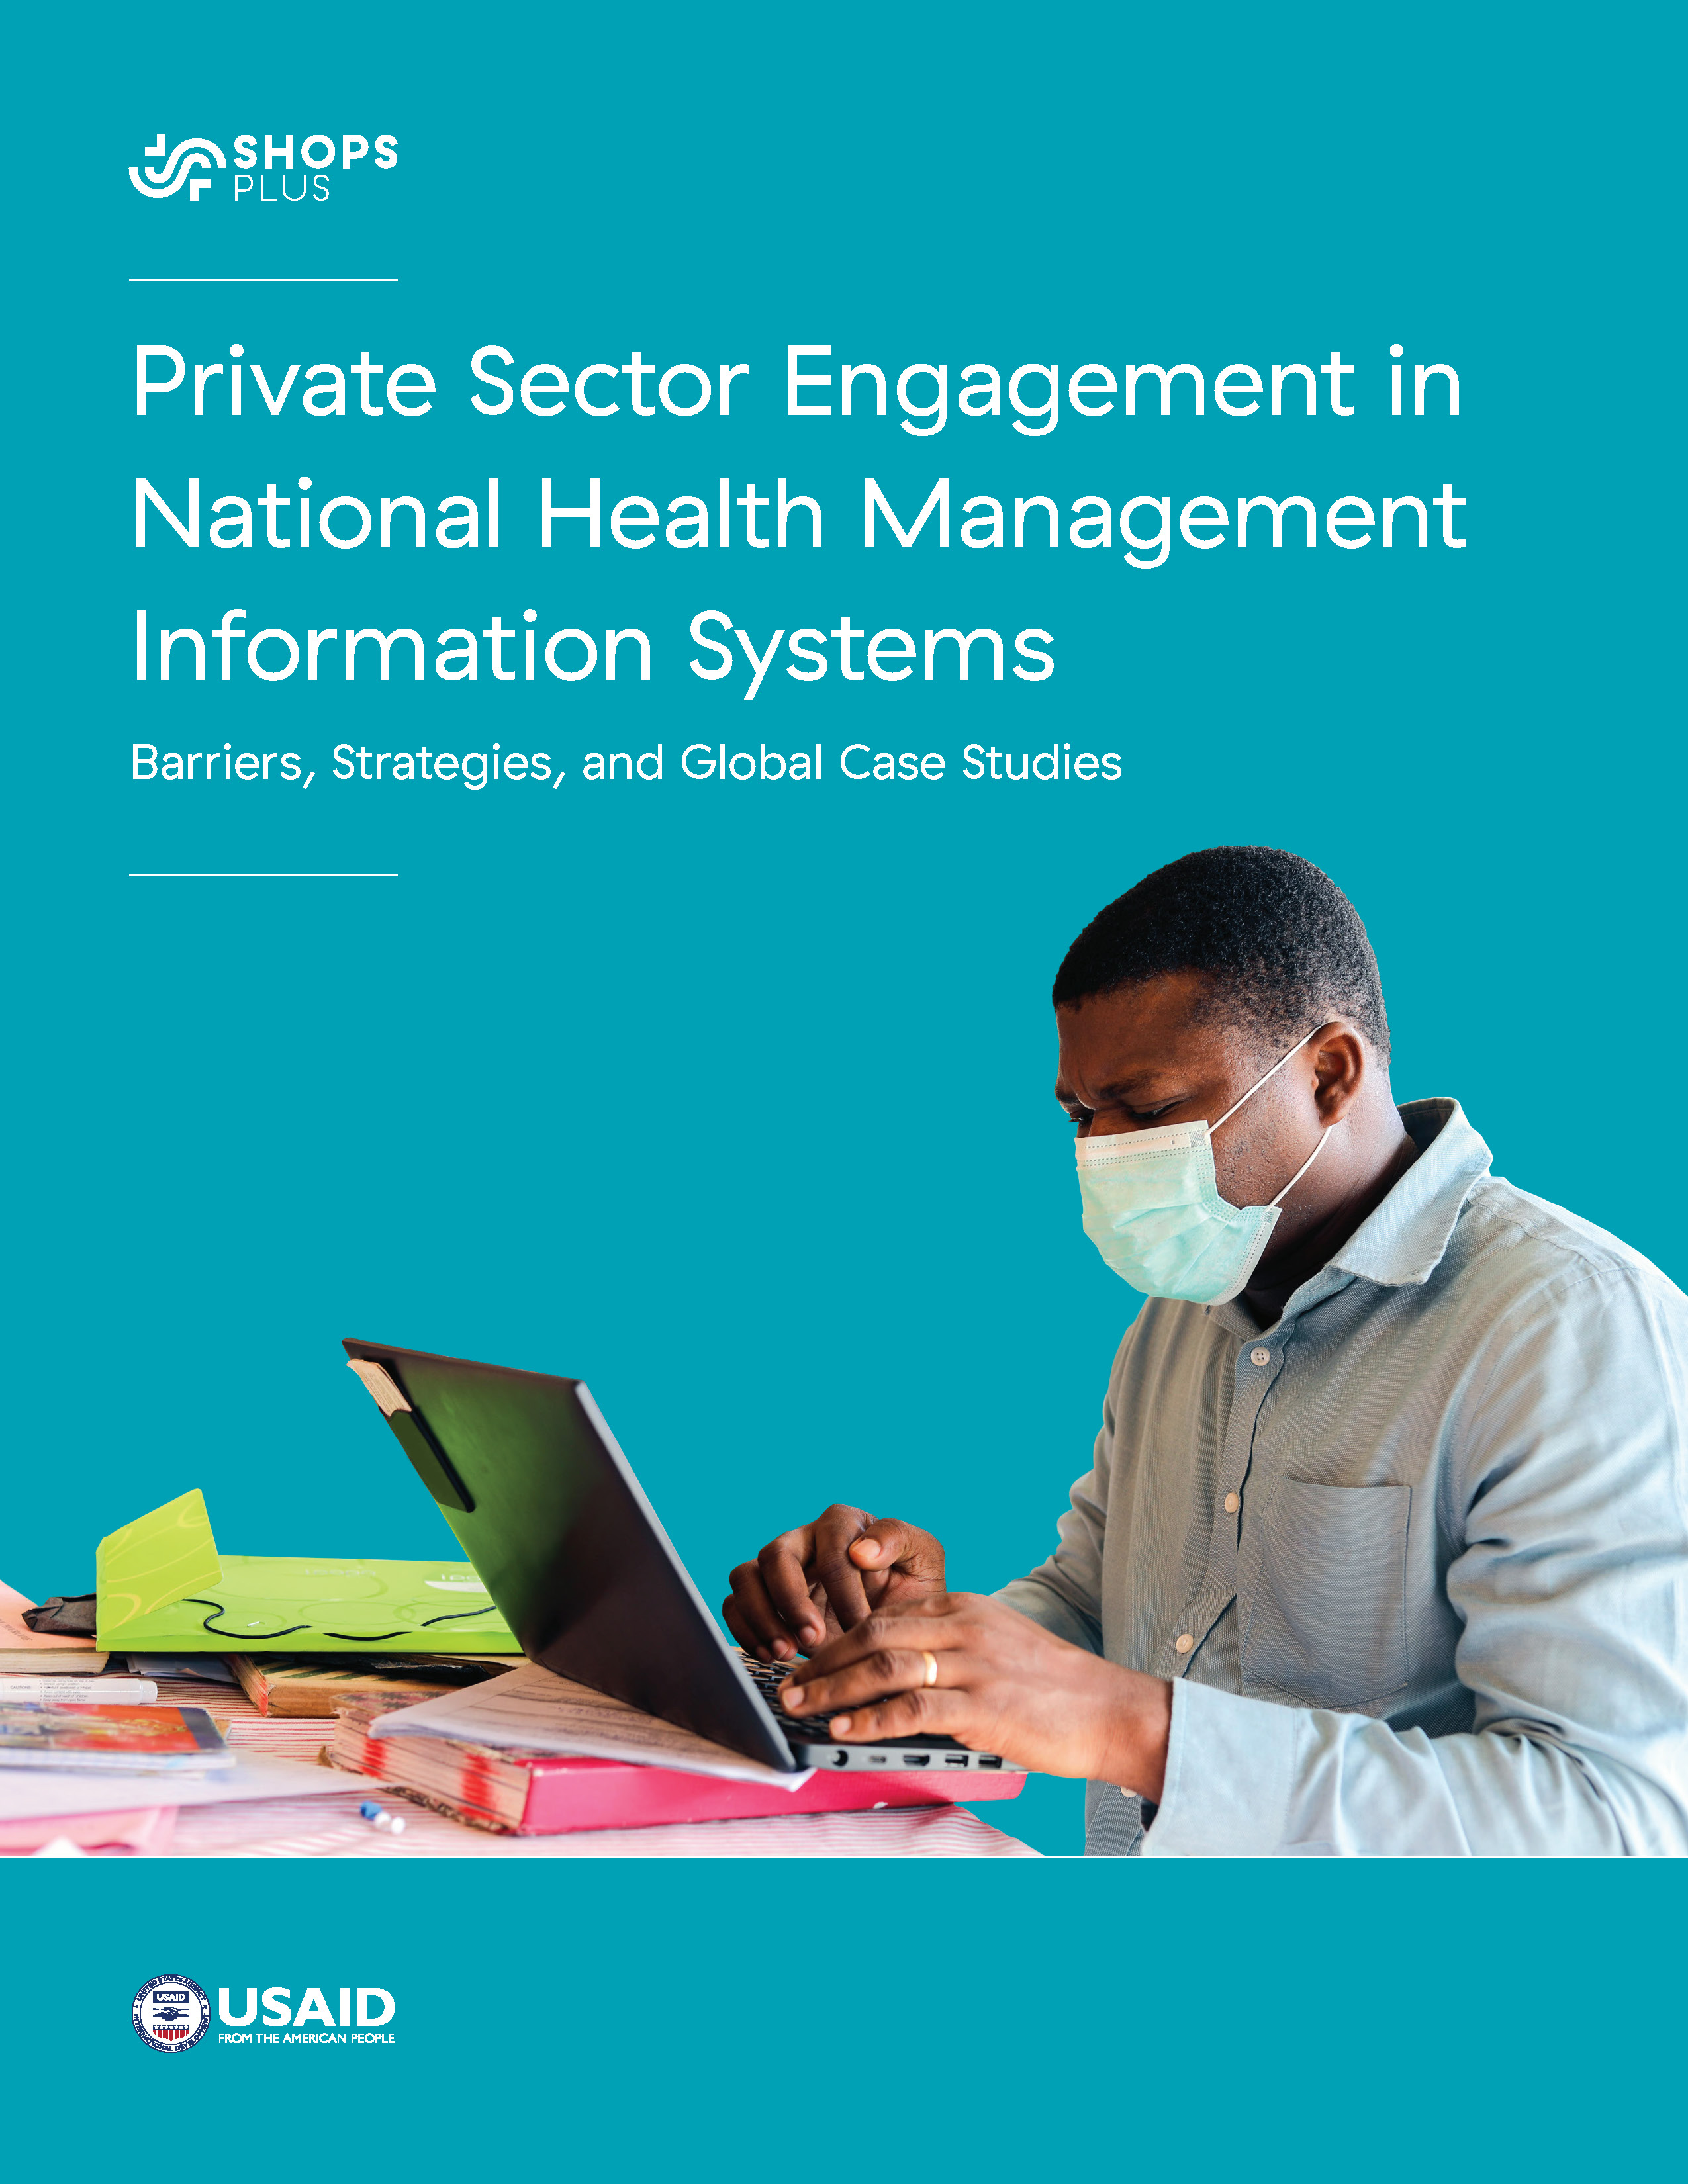 Cover for the report Private Sector Engagement in National Health Management Information Systems: Barriers, Strategies, and Global Case Studies